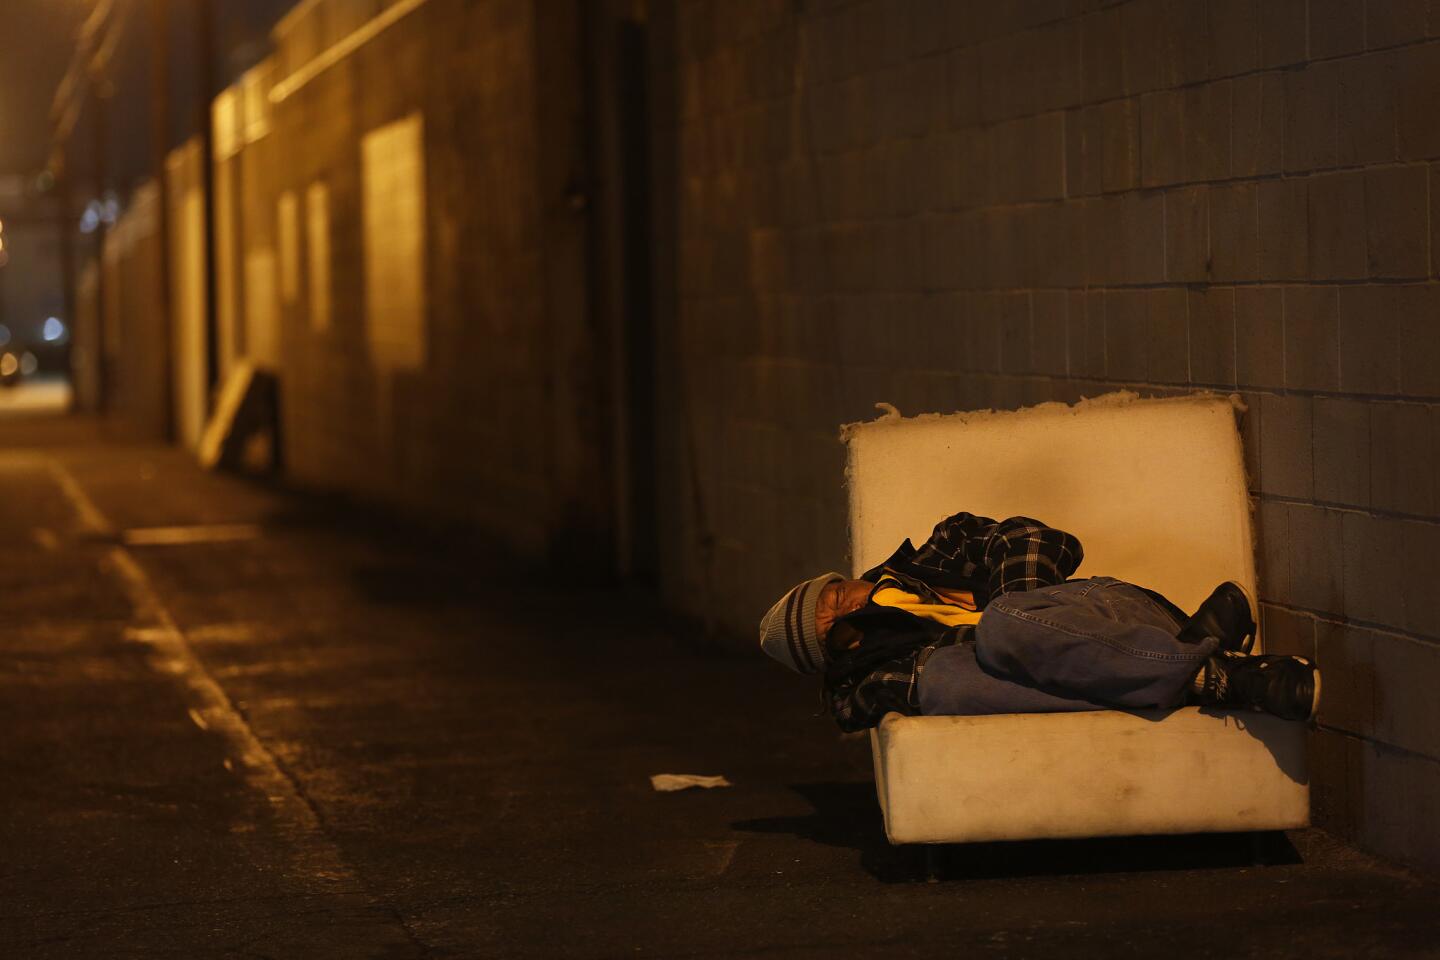 One person counted in the homeless survey sleeps in an alley. Dozens of volunteers fanned out around neighborhoods in North Hollywood to conduct part of the 2016 Greater Los Angeles Homeless Count.